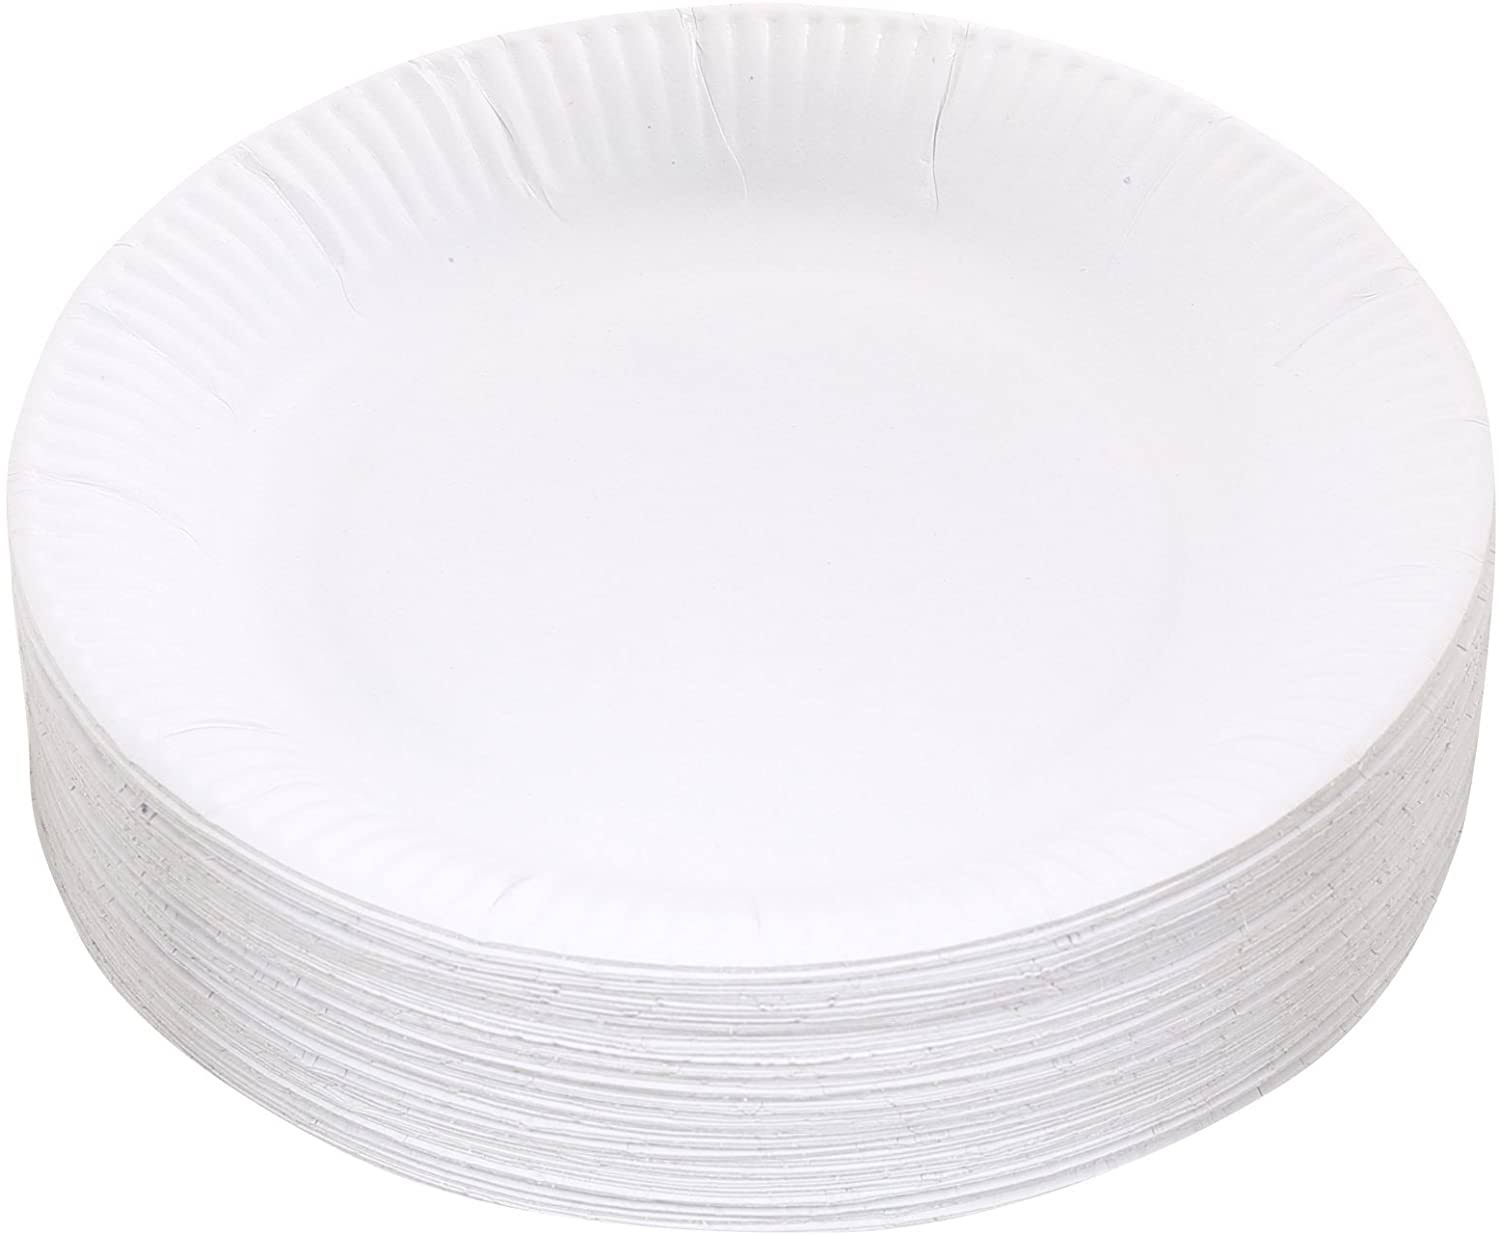 Kingfisher KCP1009 White Disposable Paper Plates 9" Pack of 100